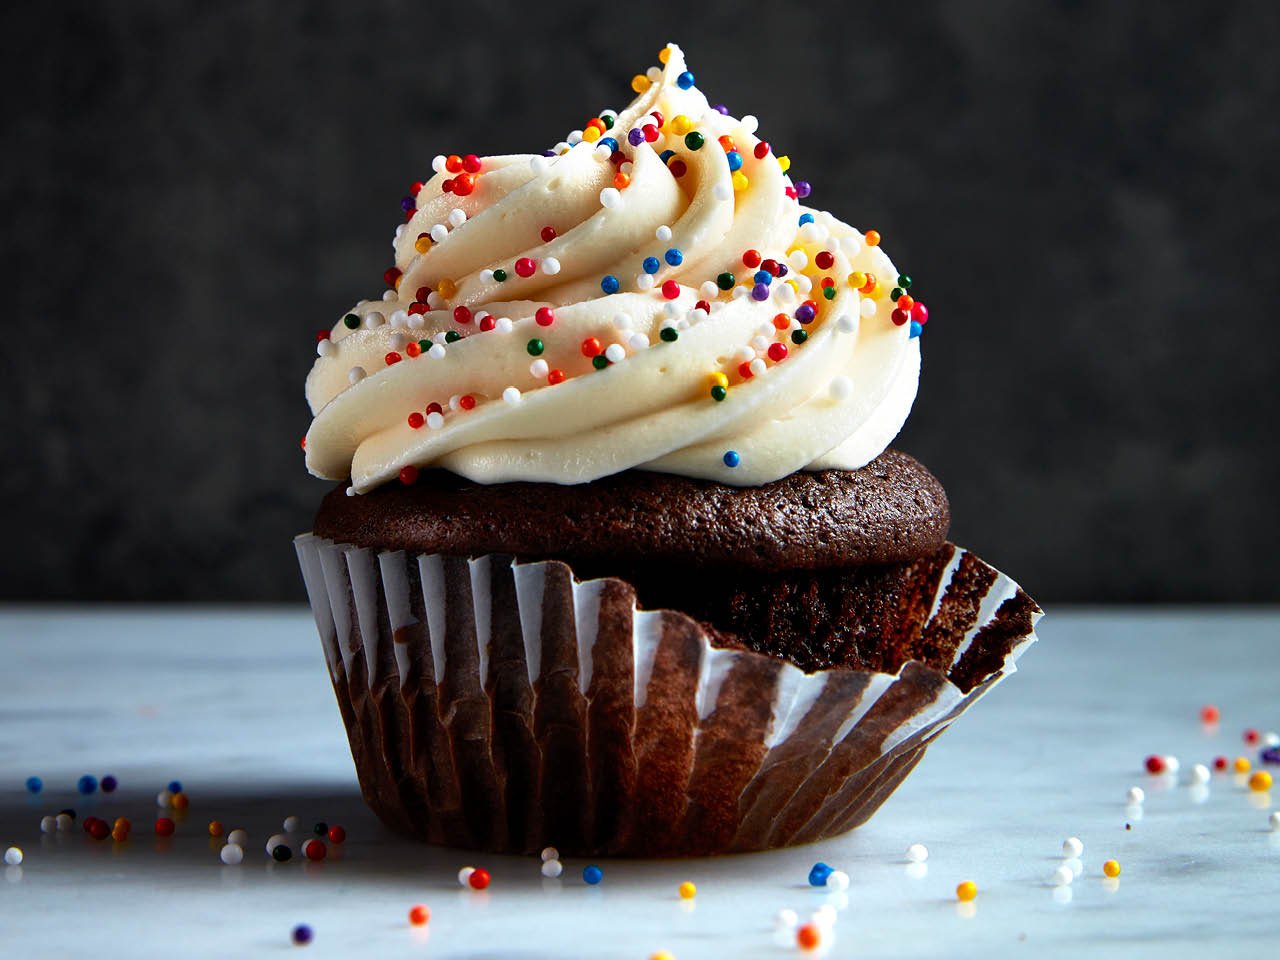 Chocolate cupcakes recipe with vanilla buttercream icing - Chatelaine